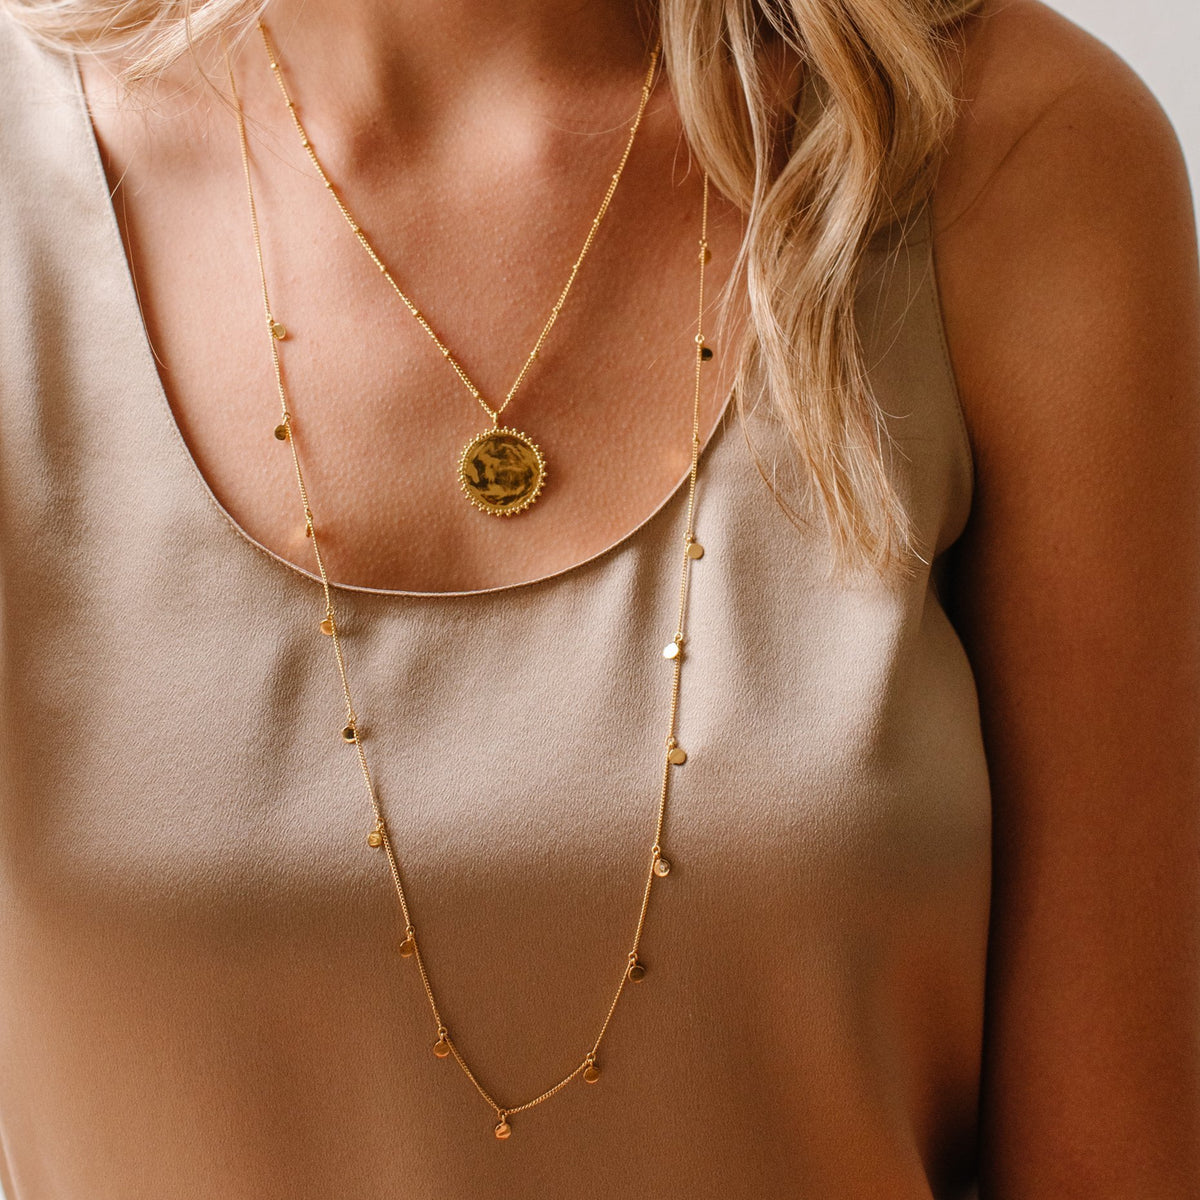 POISE LONG DISK NECKLACE - GOLD - SO PRETTY CARA COTTER